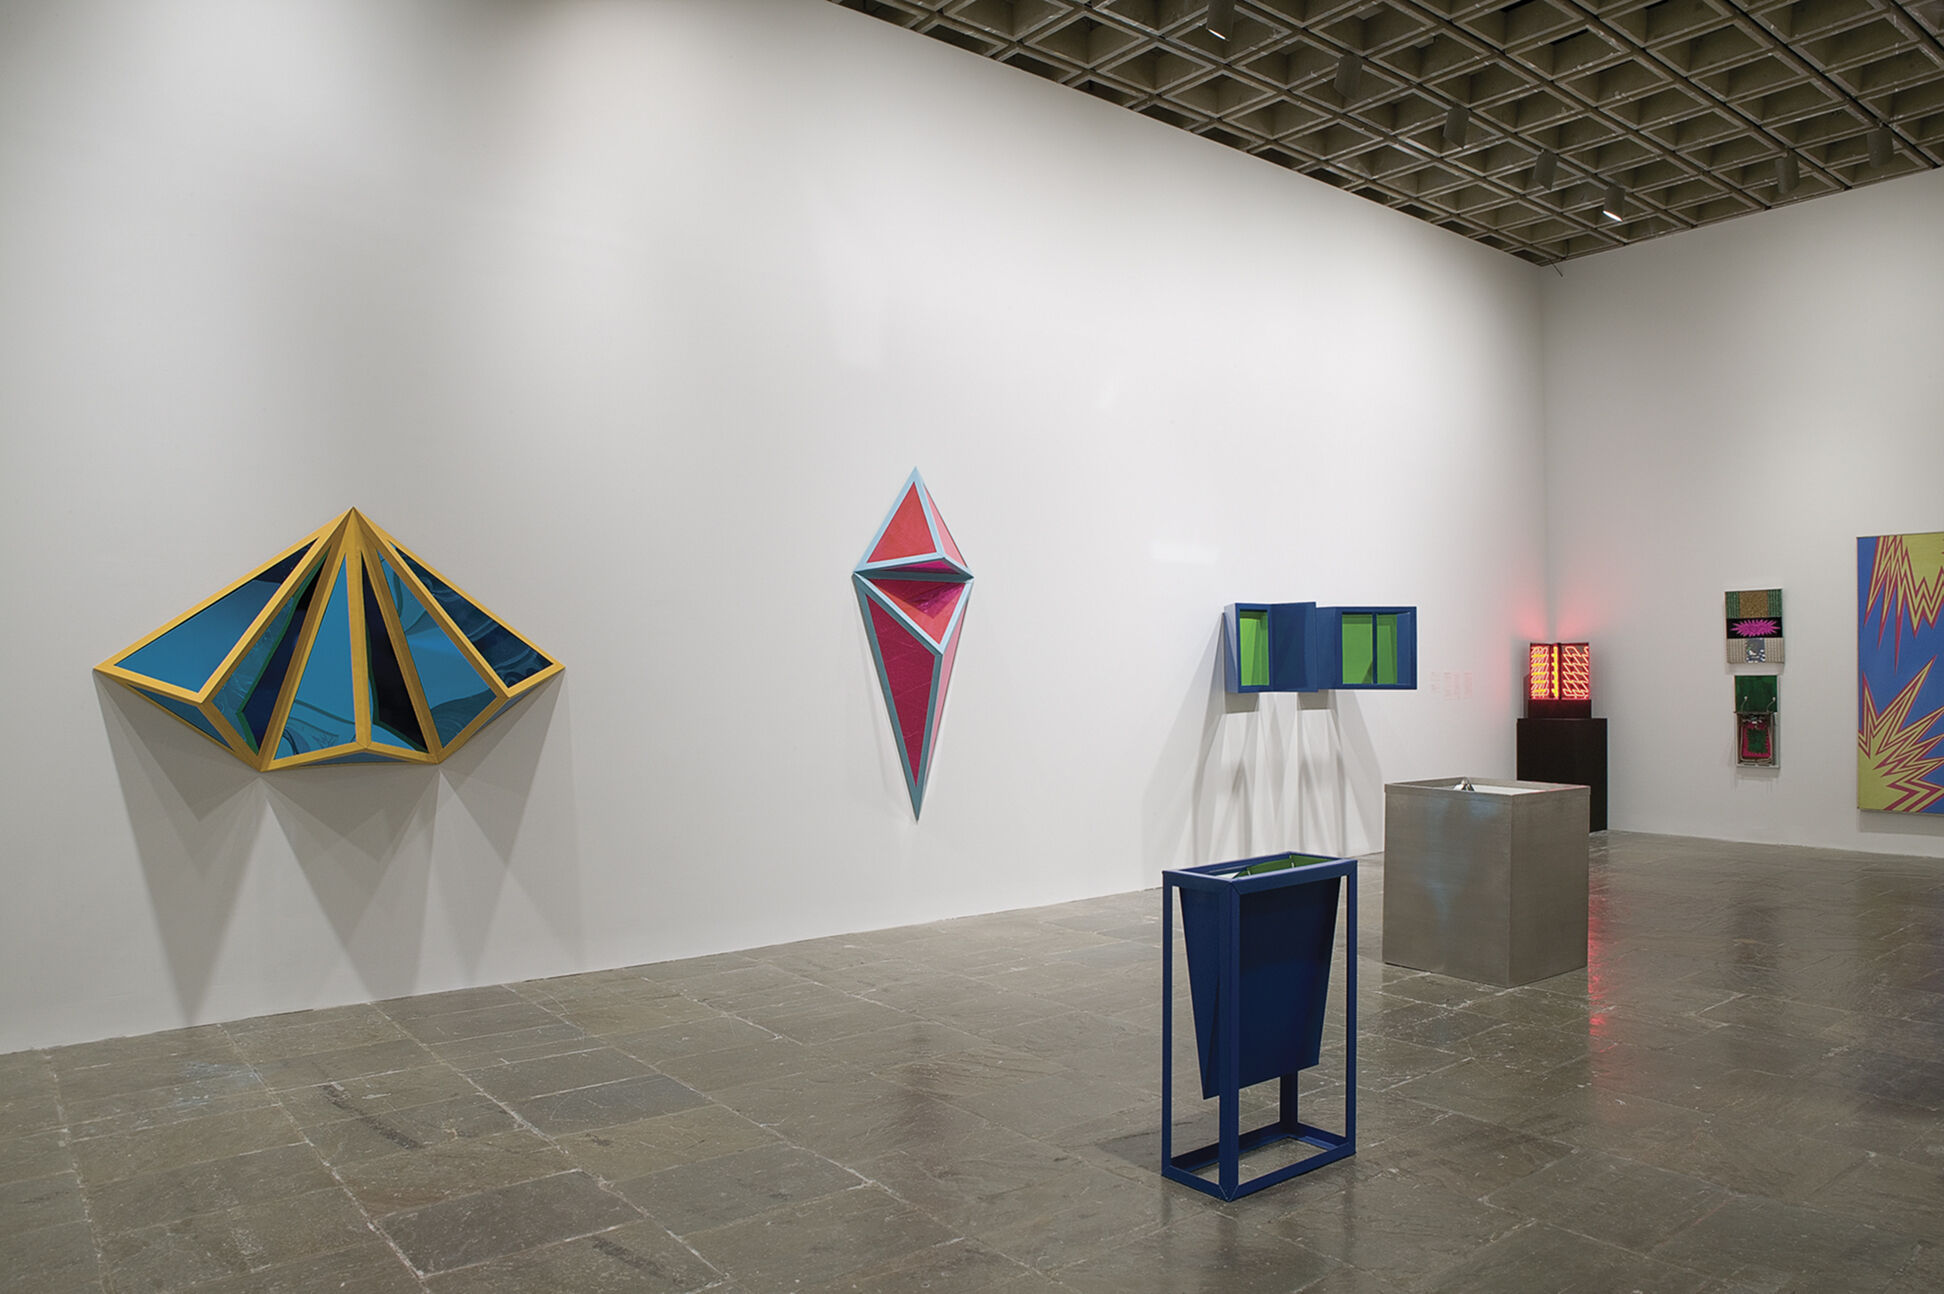 Colorful sculptures displayed in a gallery.